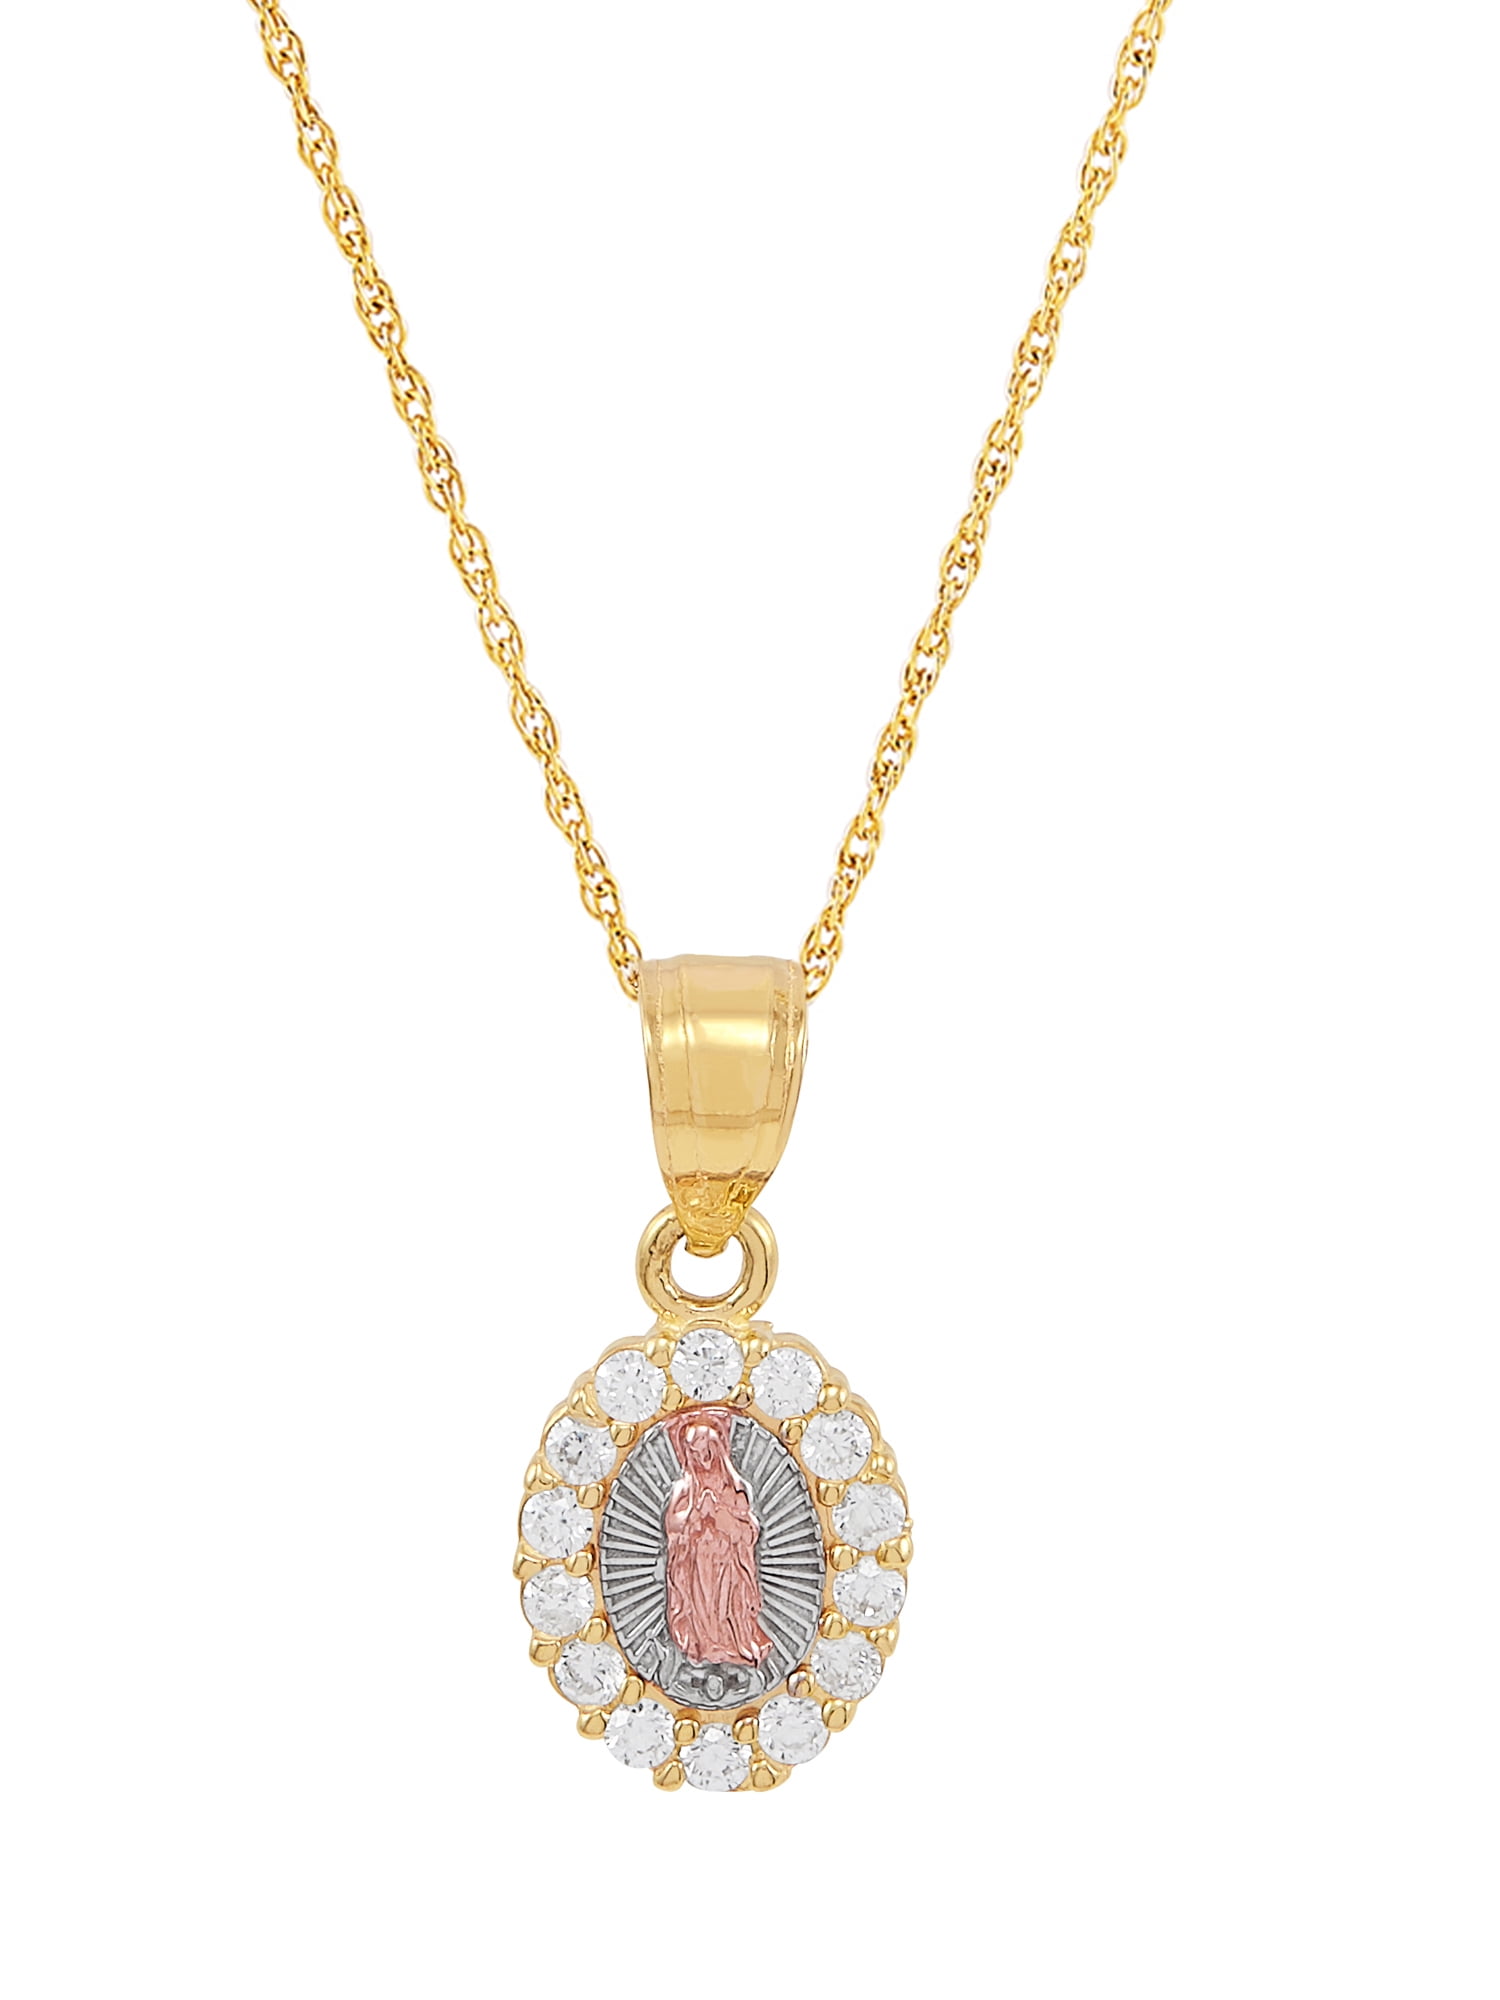 Childs Praying Hands of Mary in 10k SOLID Yellow Gold Pendant